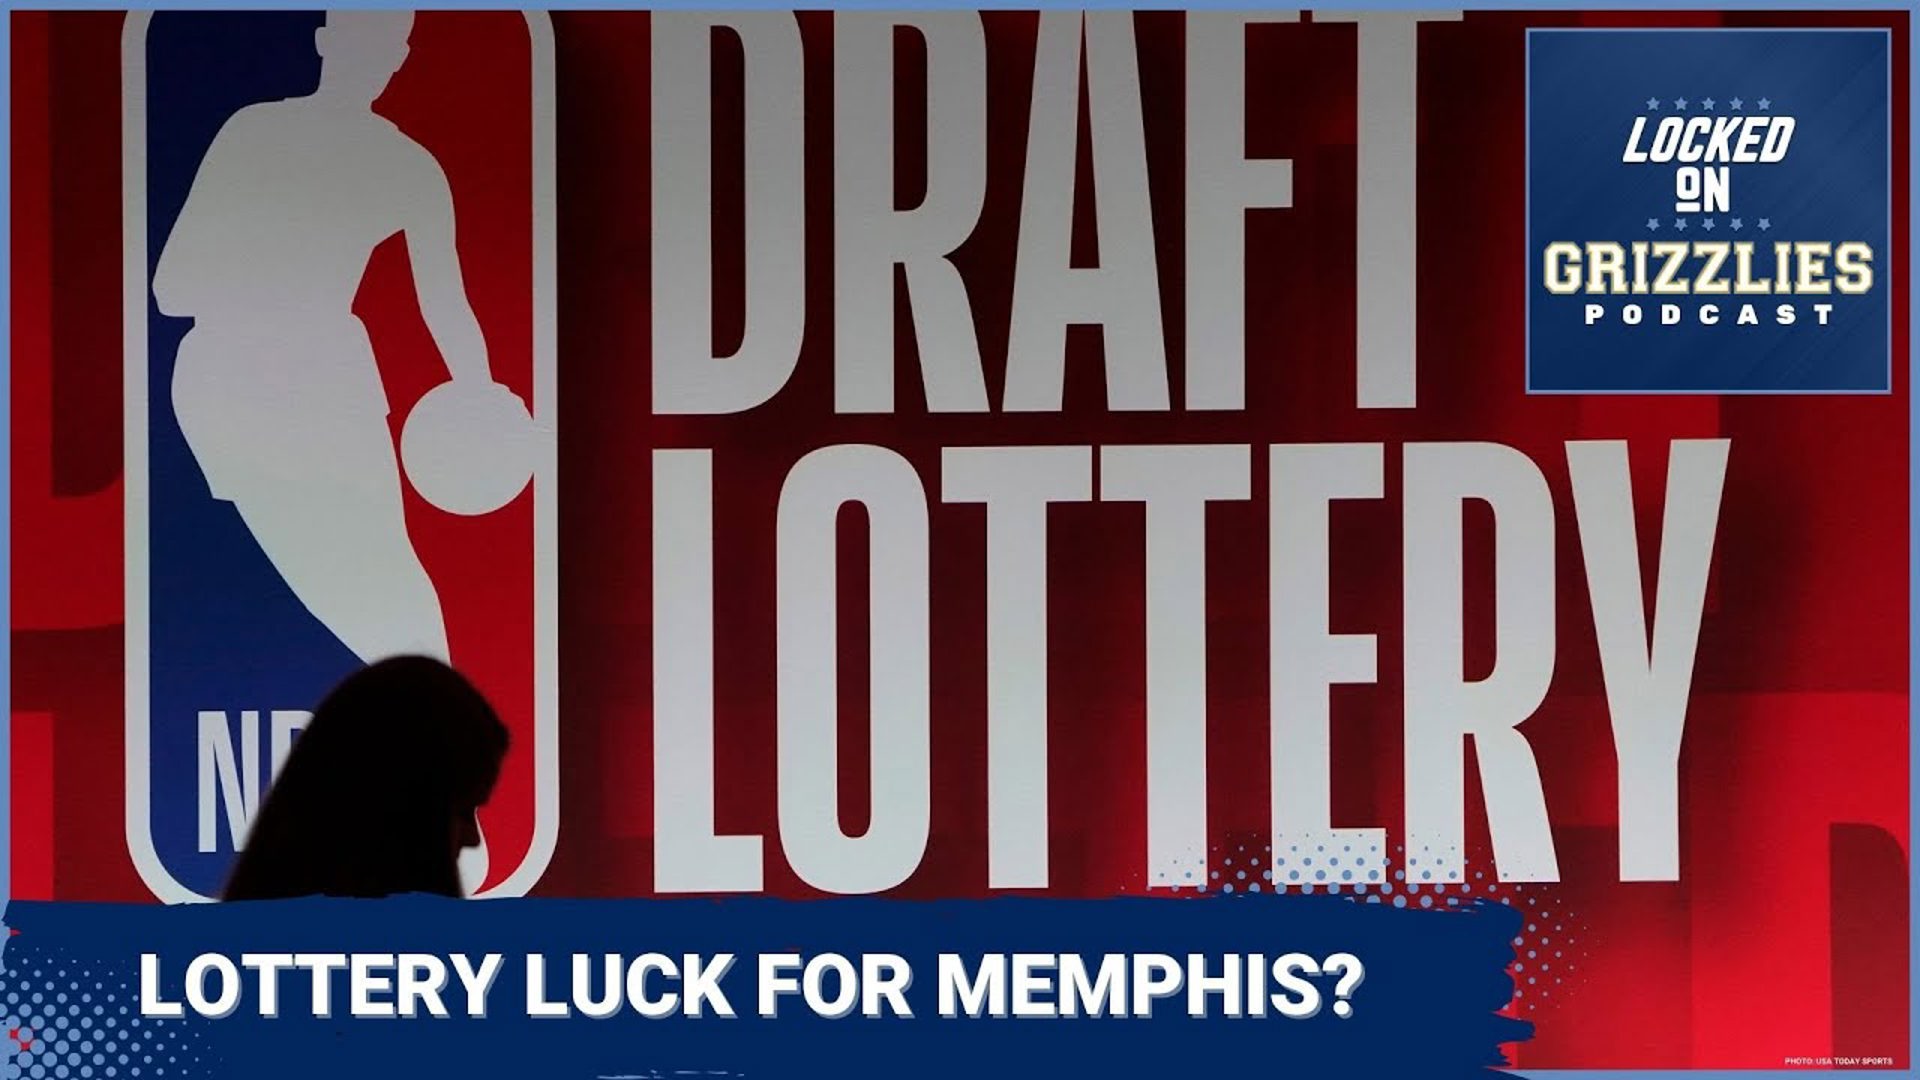 Breaking down the Grizzlies' chances of securing a top-four pick in the NBA draft lottery